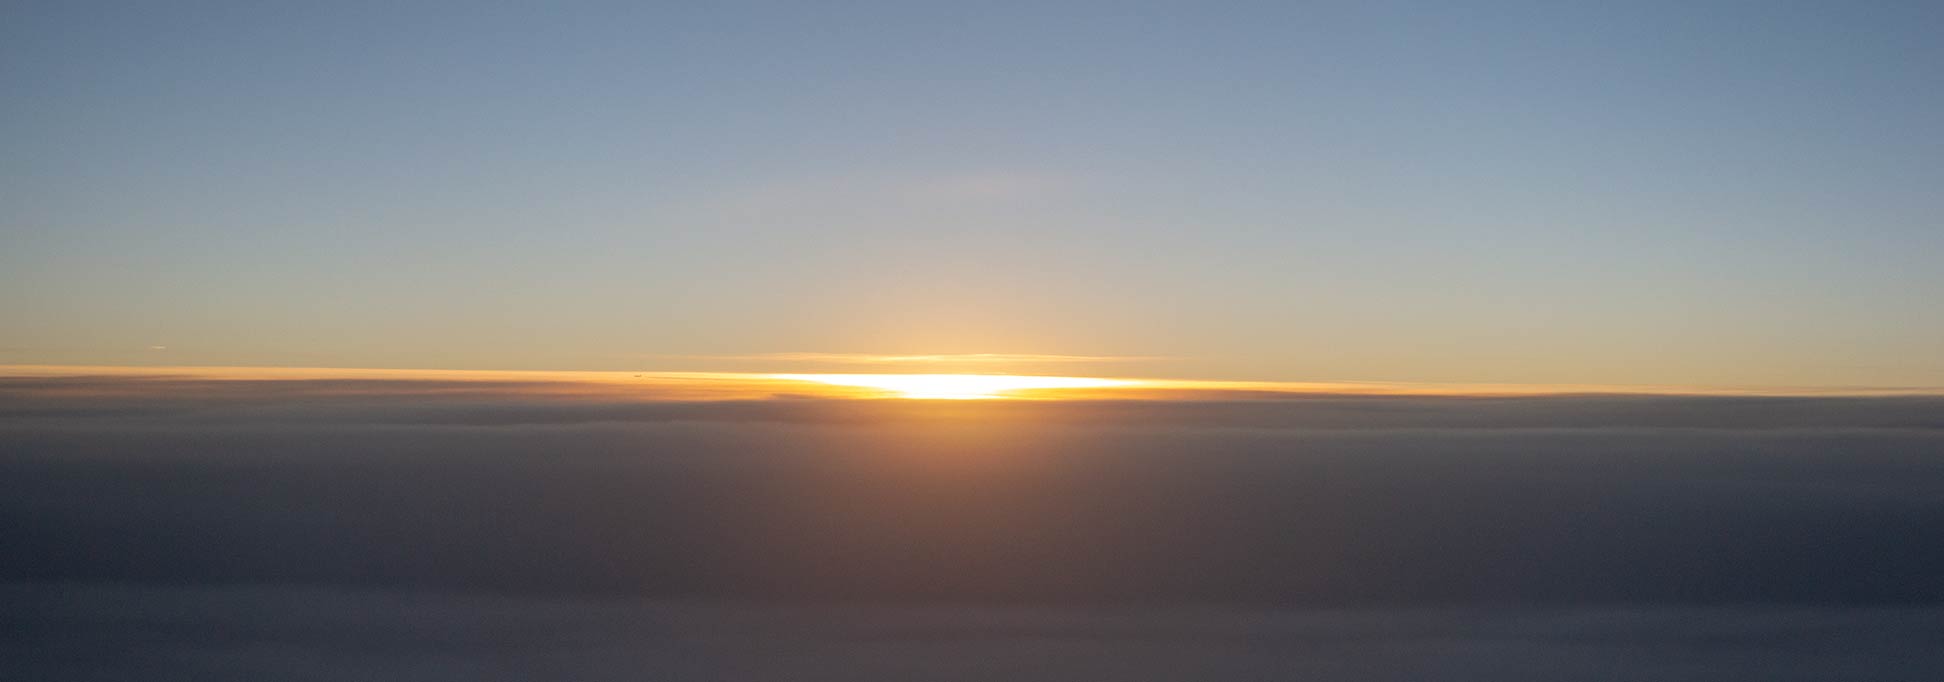 Over the clouds: Sunset in the sky